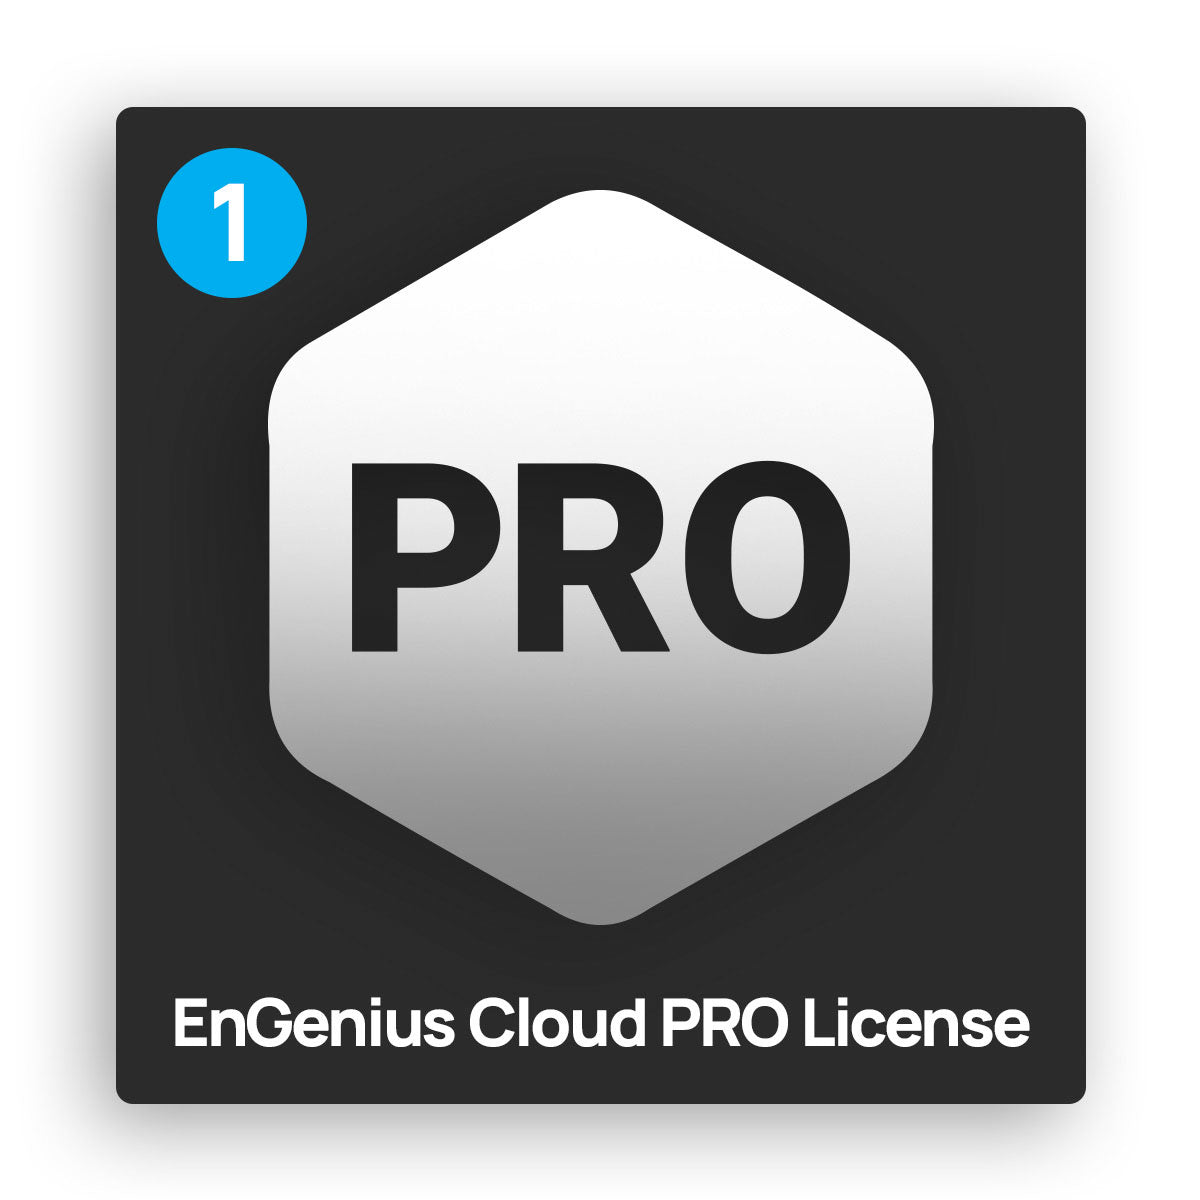 EXT-1YR-LIC: EnGenius Cloud PRO Switch Extender 1-Year License